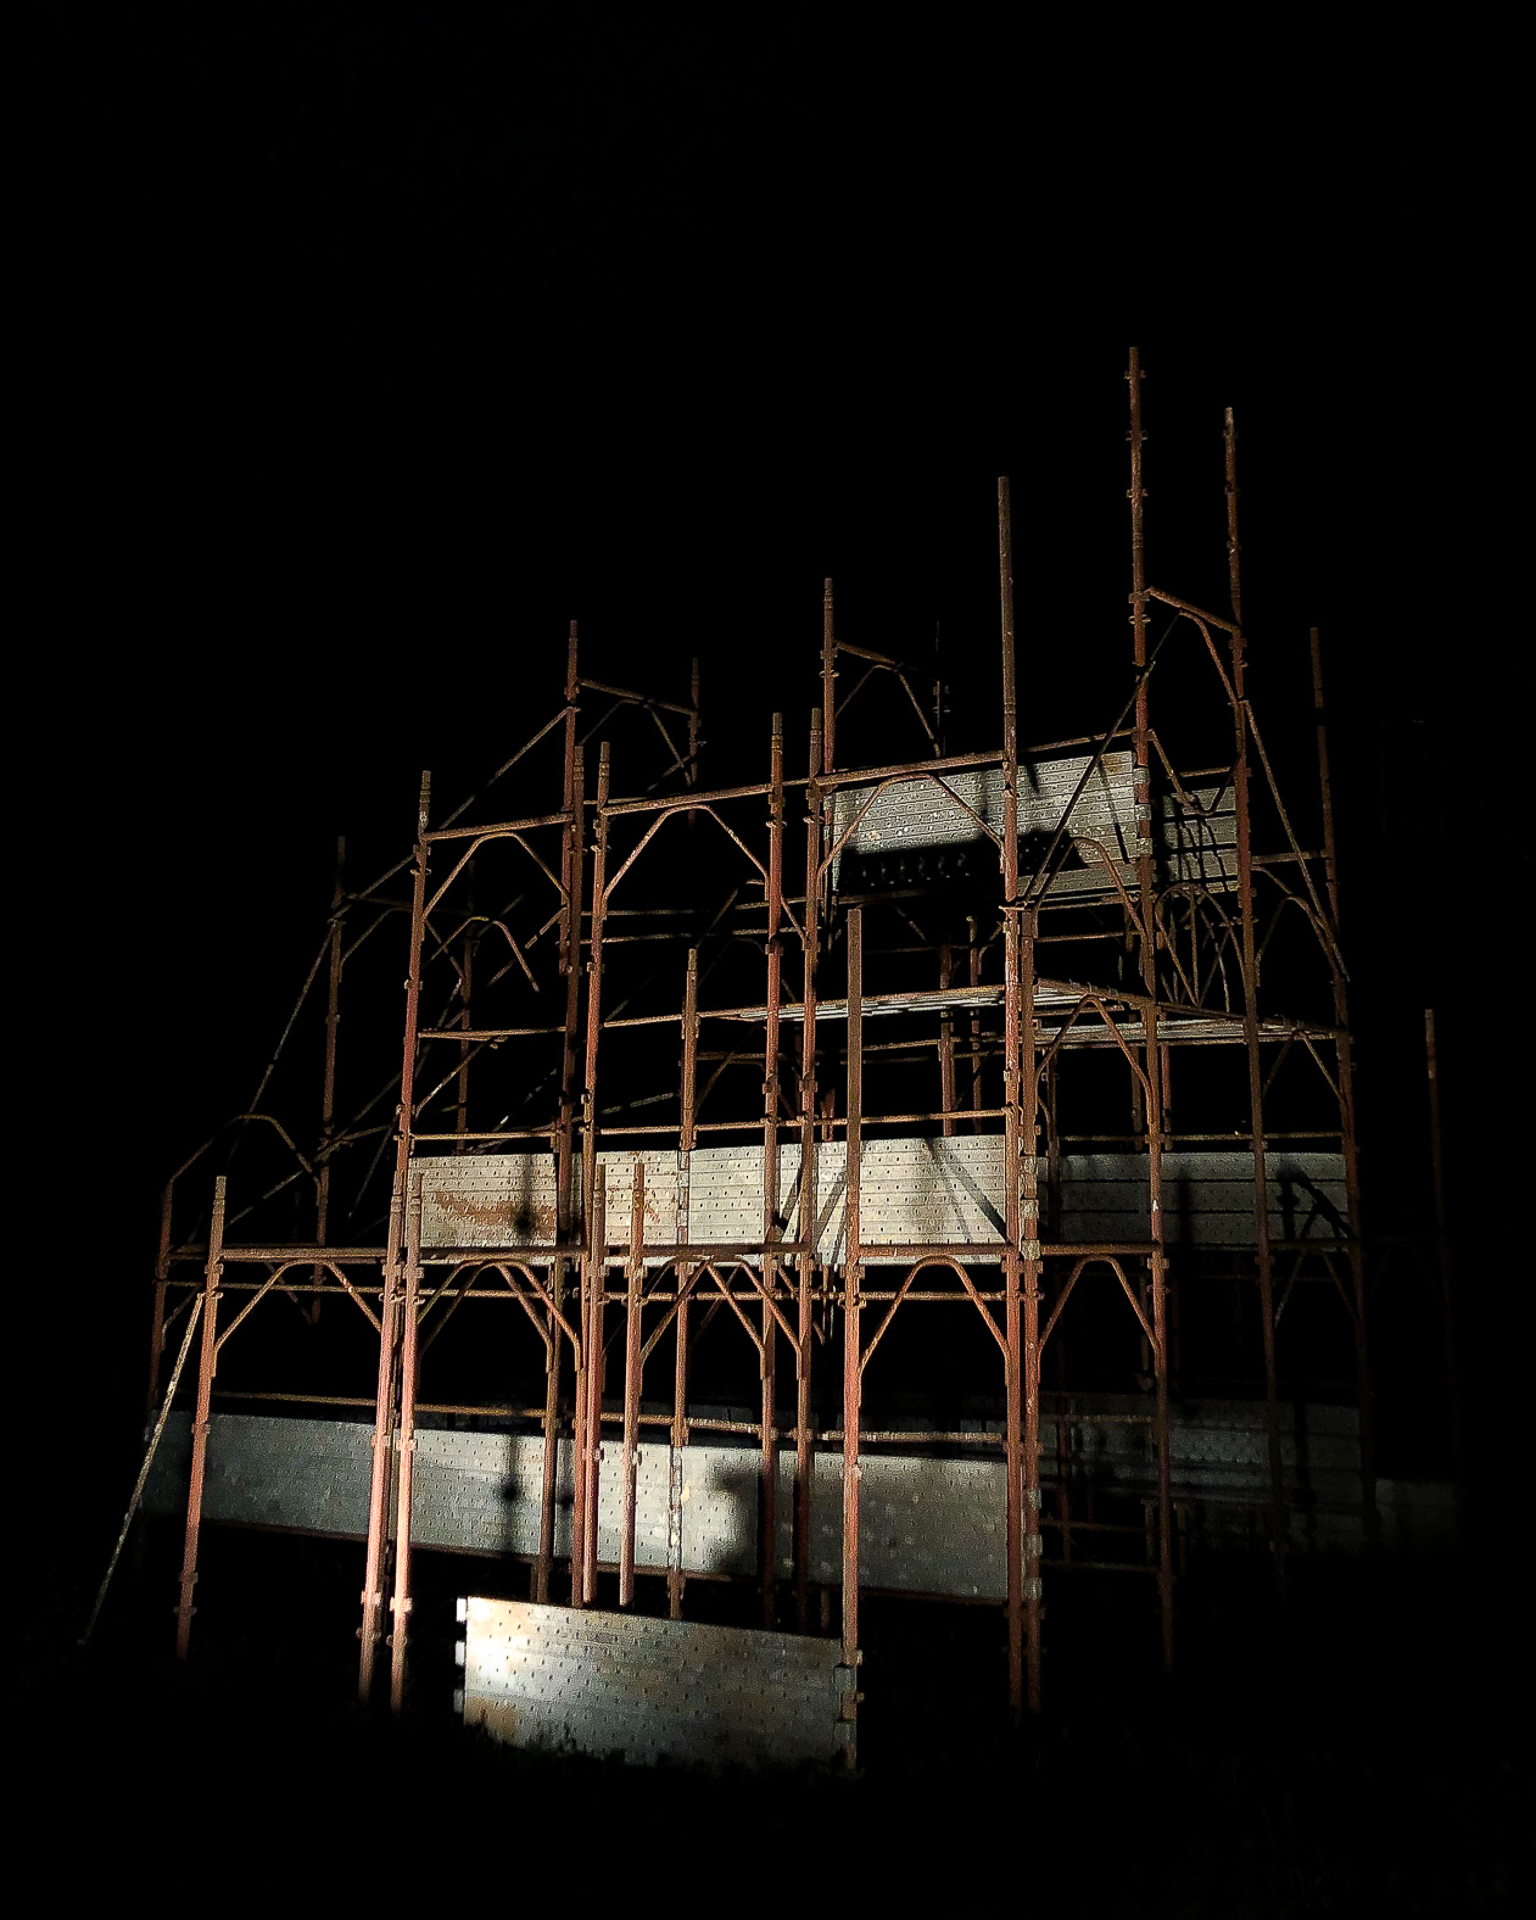 Documentation of a cathedral made from brown scaffolding, against a black background.